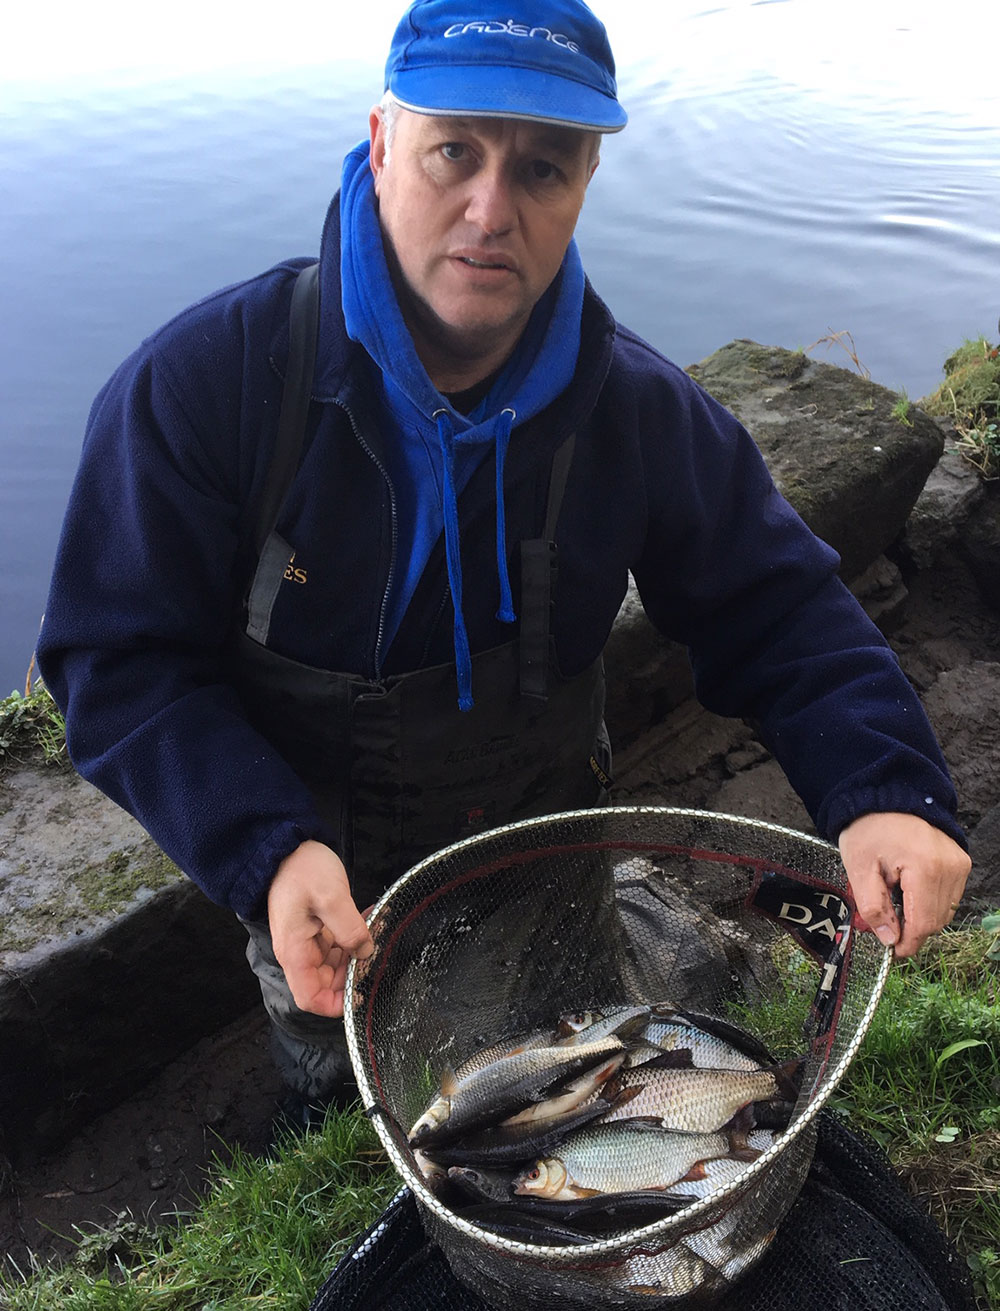 River Float Fishing with Punched Bread: Alan caught this stunning 16lb net of roach in just three hours on a day mentioned in the blog when there was a bad downstream wind and he used a delicately shotted wire-stem stick in gin-clear water.